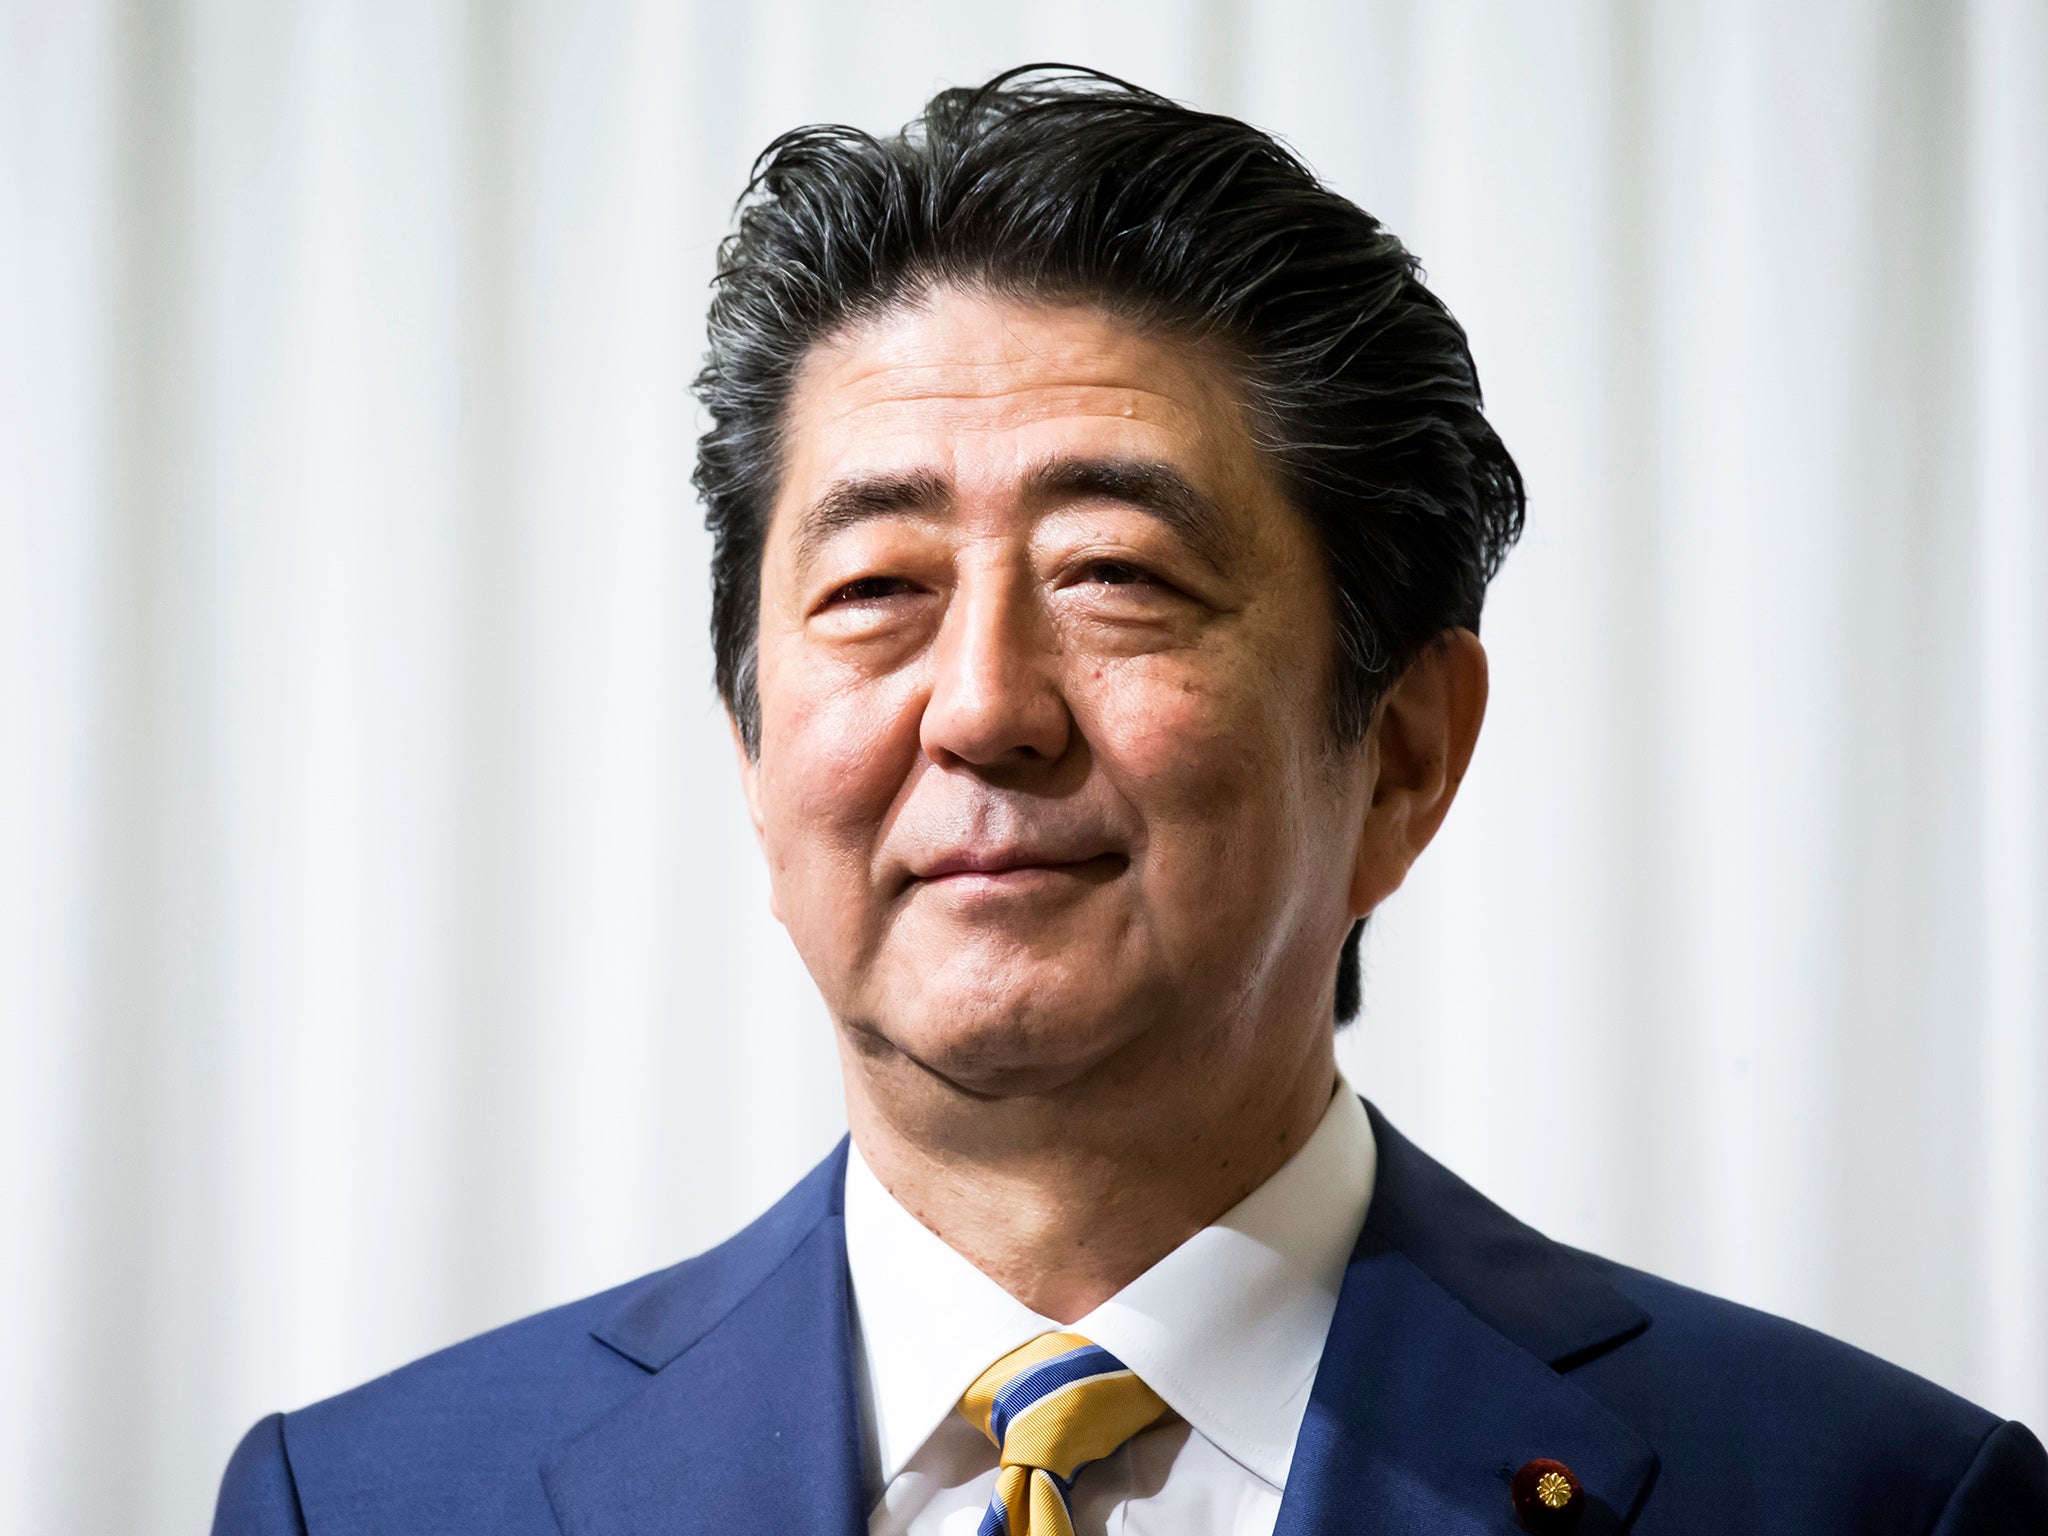 Abe brought a measure of stability as prime minister from 2012 to 2020